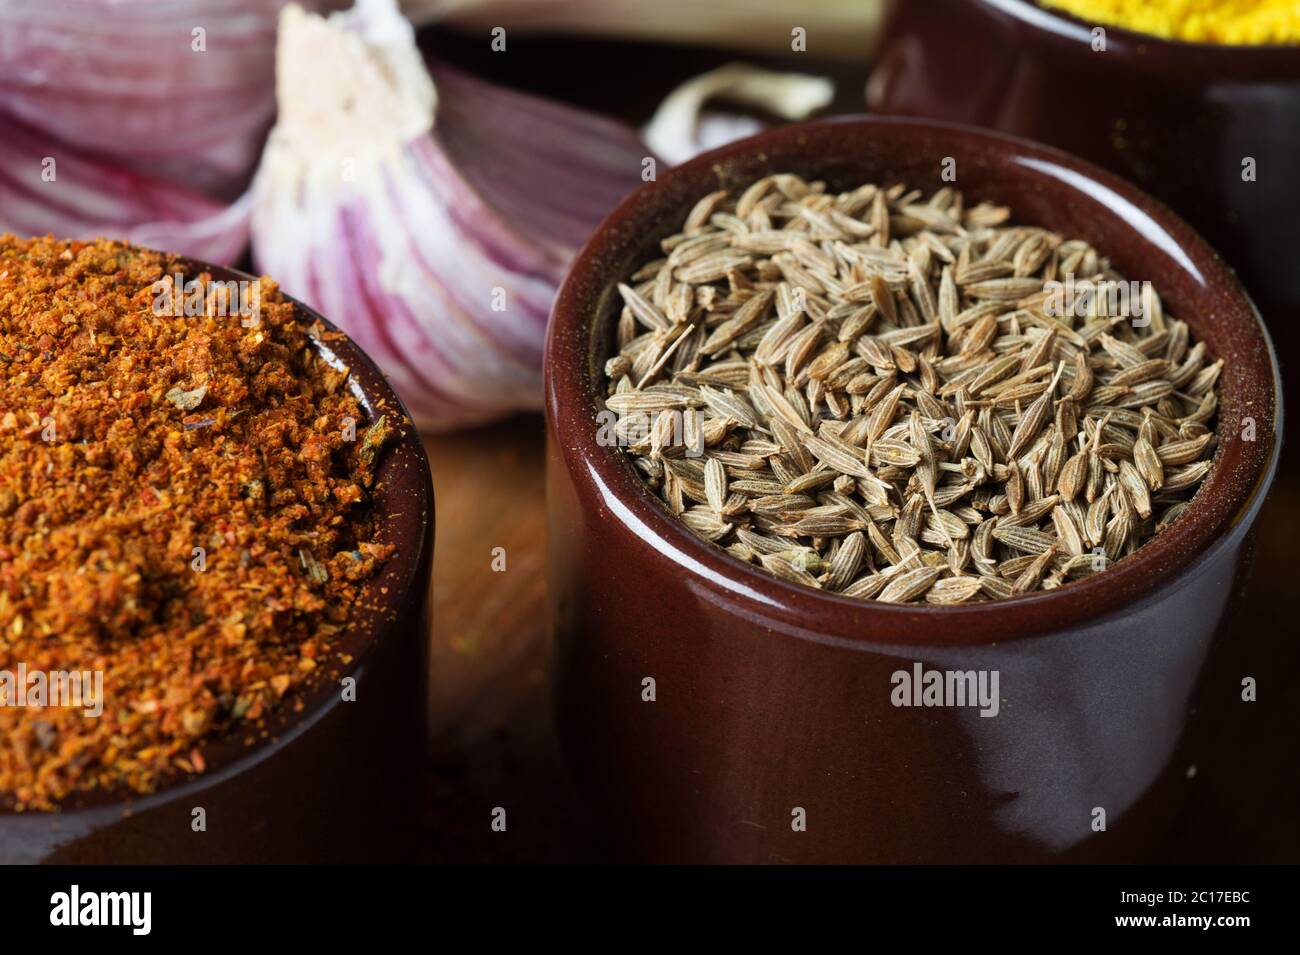 Spices and herbs in ceramic bowls. zira seasoning. Colorful natural additives. Stock Photo